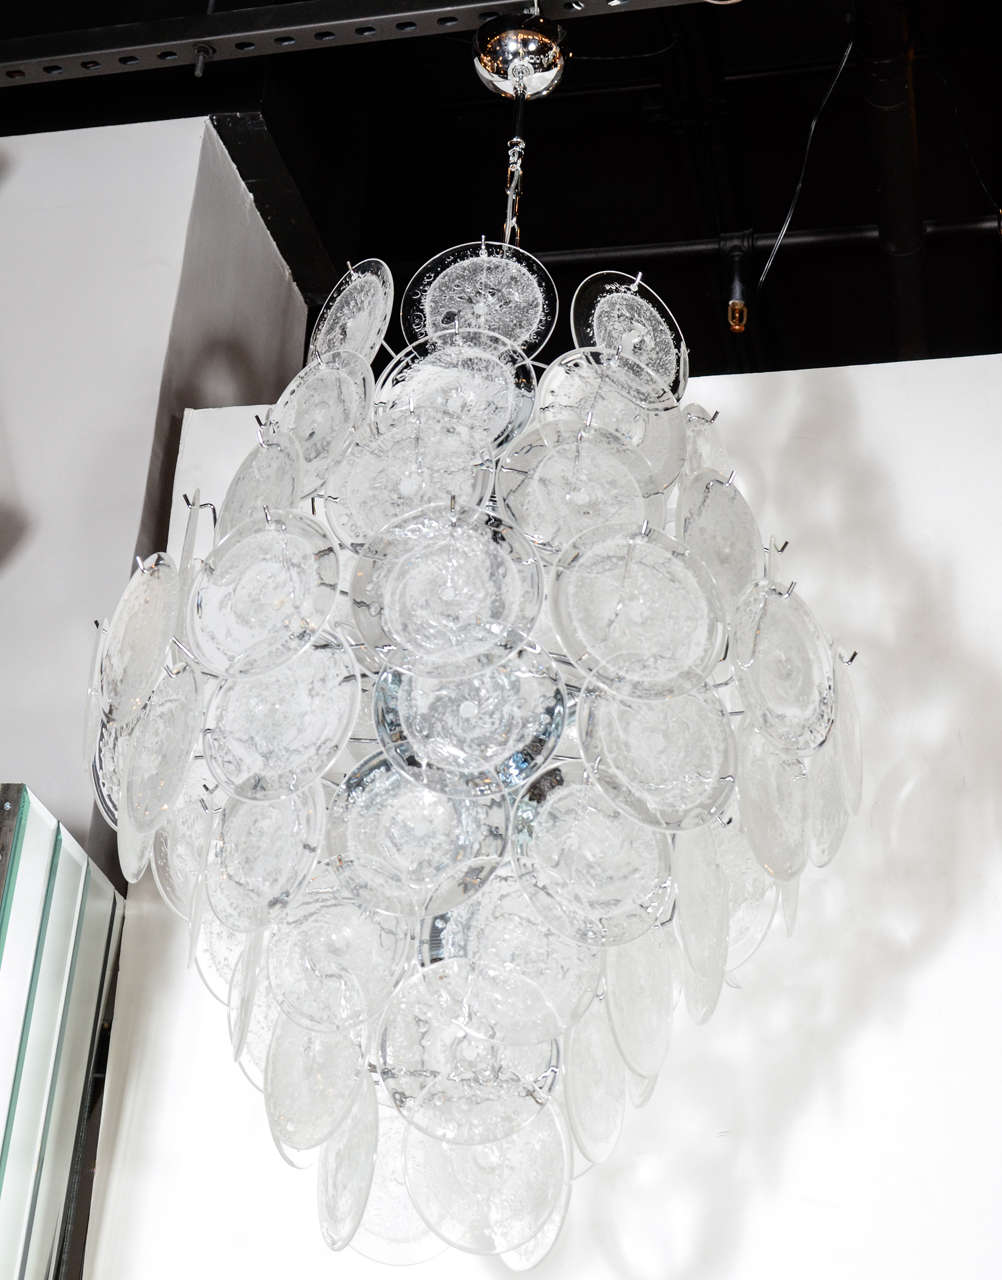 This exceptional chandelier by Vistosi boasts 84 Murano Glass Discs suspended in a diamond formation. Each disc is made by hand and incorporates a central opaque texture suspended in the glass.